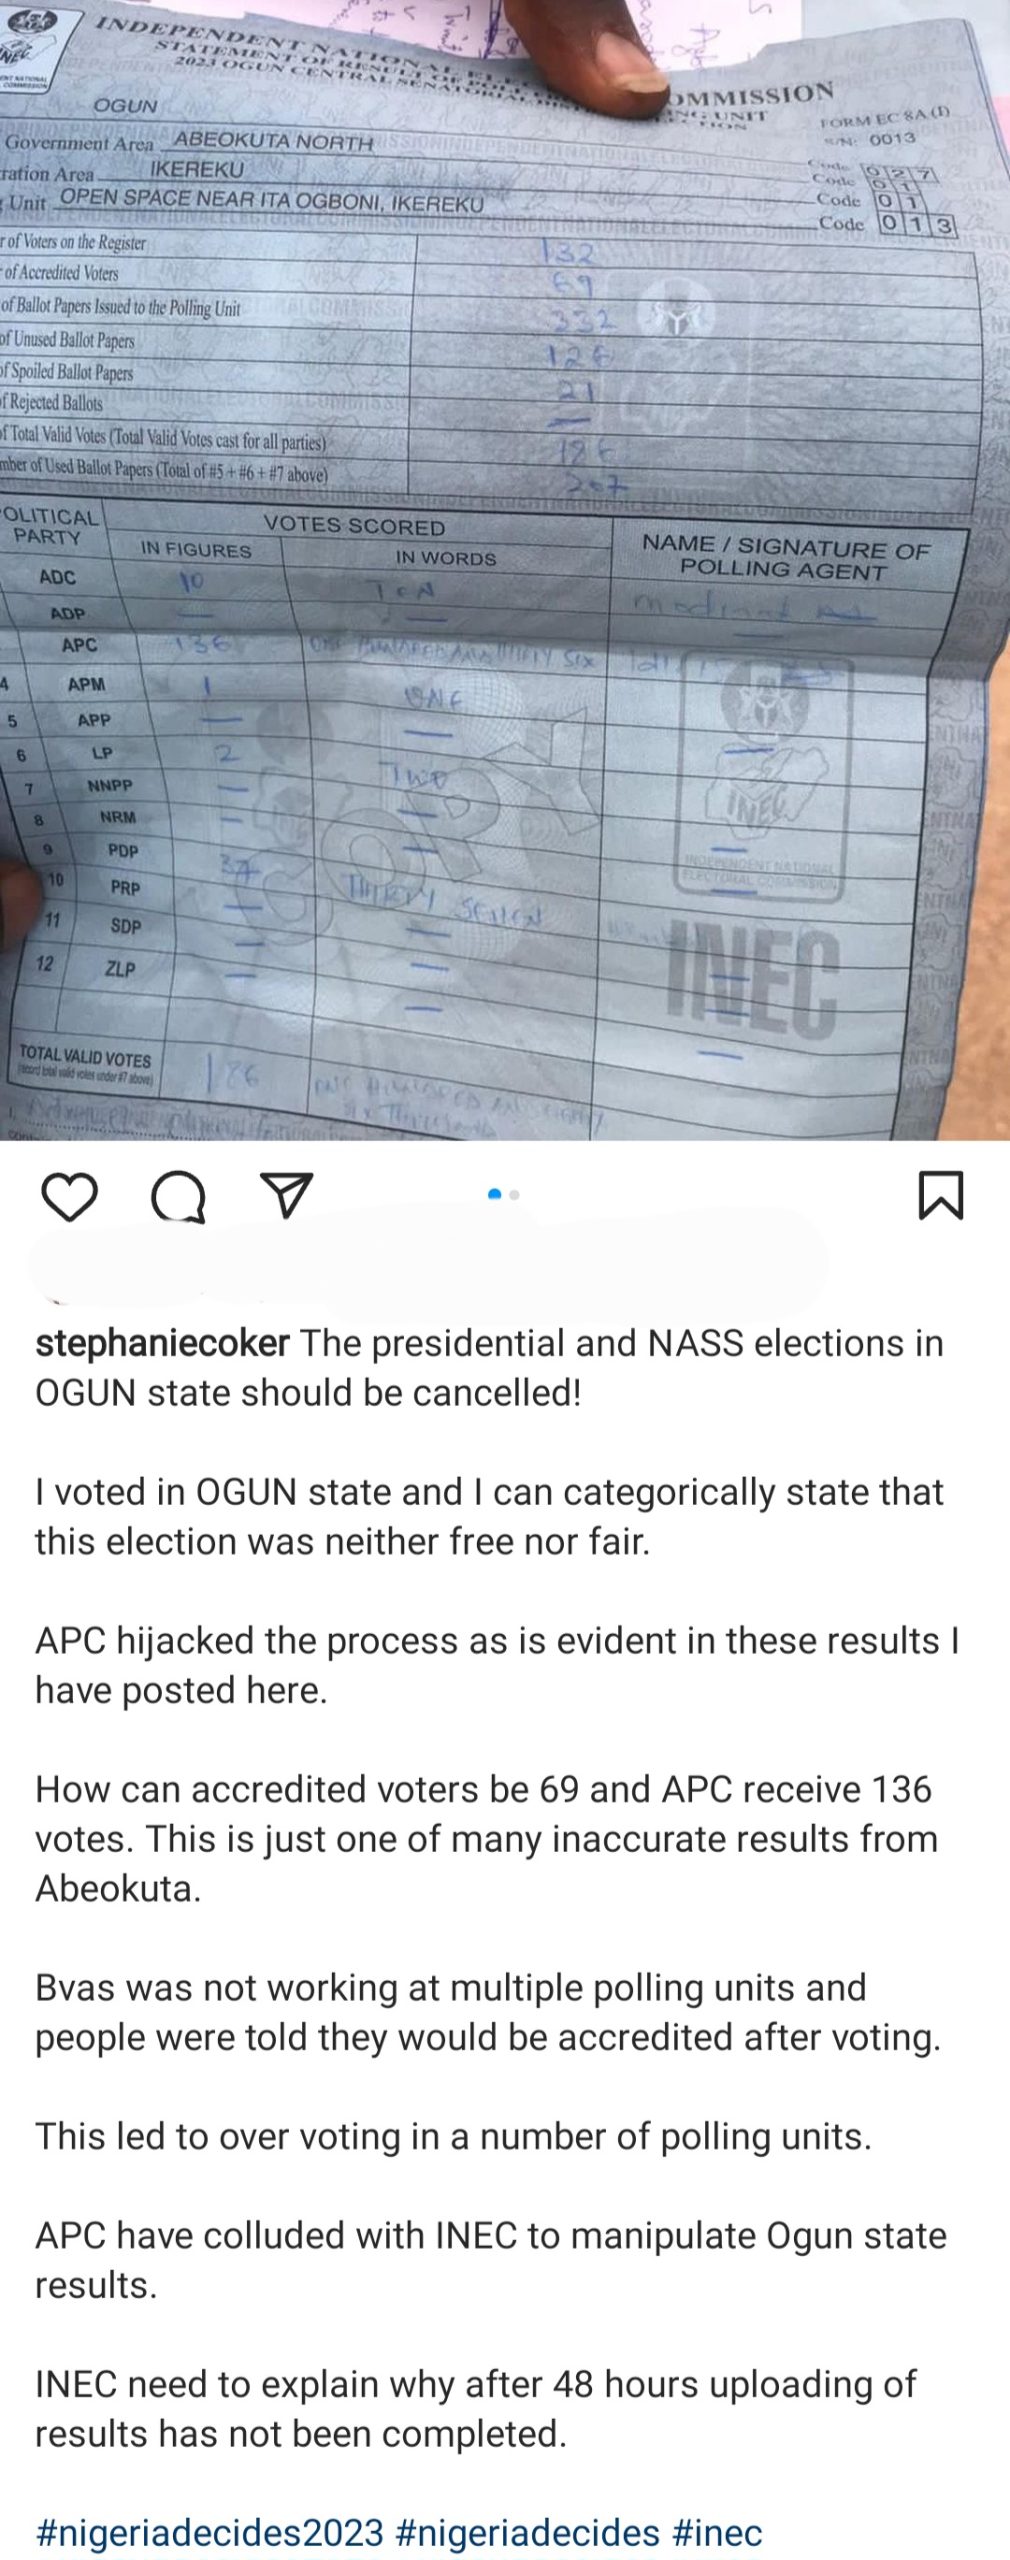 "APC have coluded with INEC to manipulate Ogun State results" Media personality Stephanie Coker calls for Ogun State elections to be cancelled